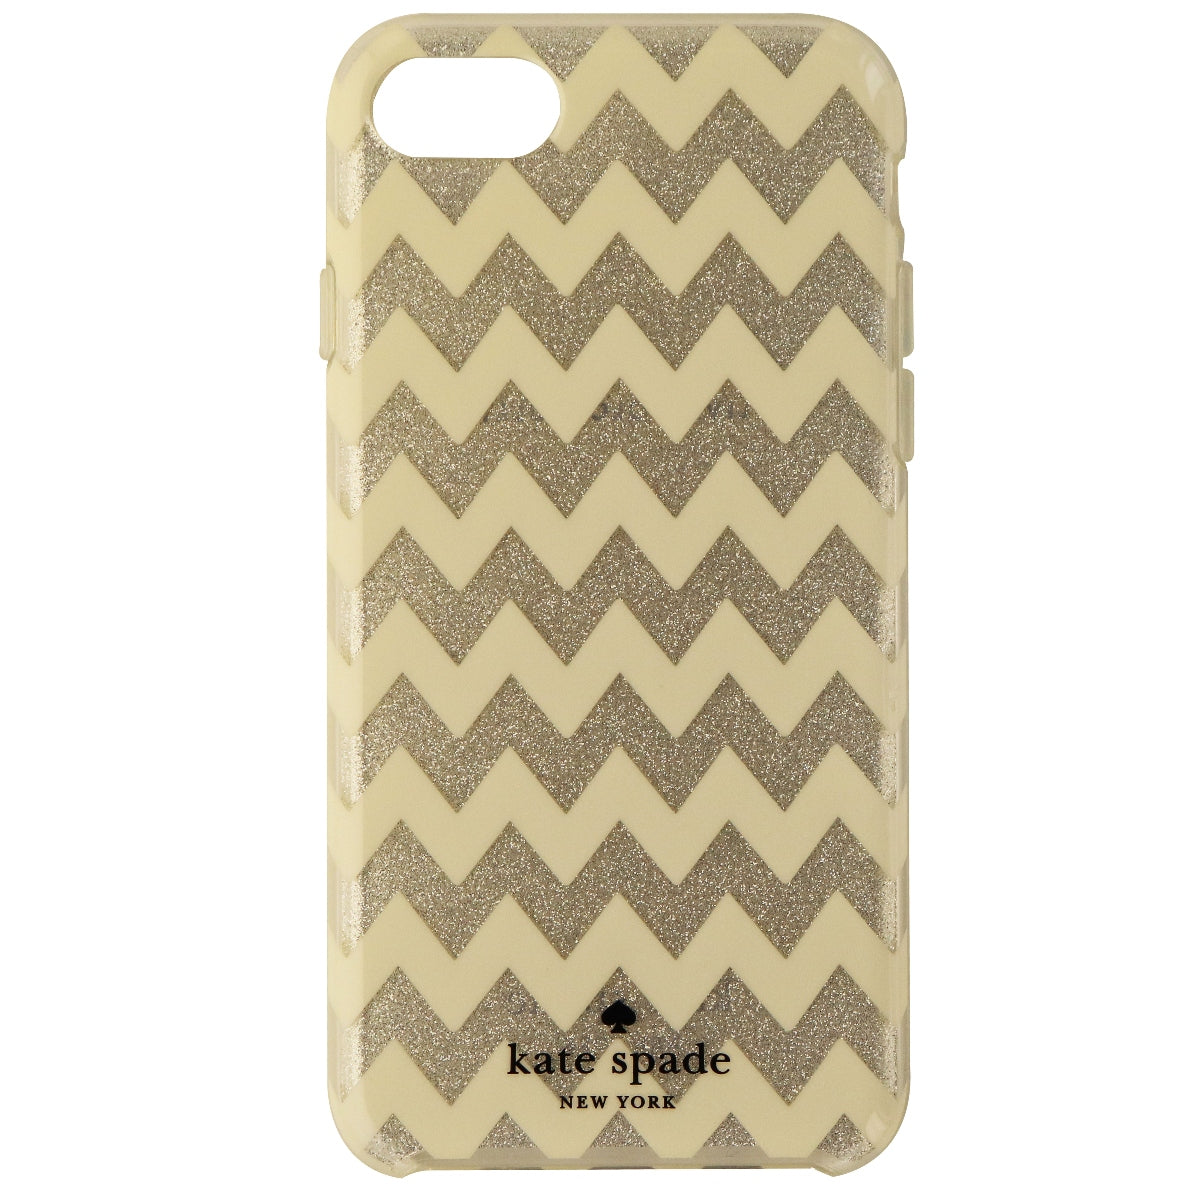 Kate Spade New York Hybrid Hardshell Case for iPhone 8/7 - White/Silver Zig Zag Cell Phone - Cases, Covers & Skins Kate Spade    - Simple Cell Bulk Wholesale Pricing - USA Seller